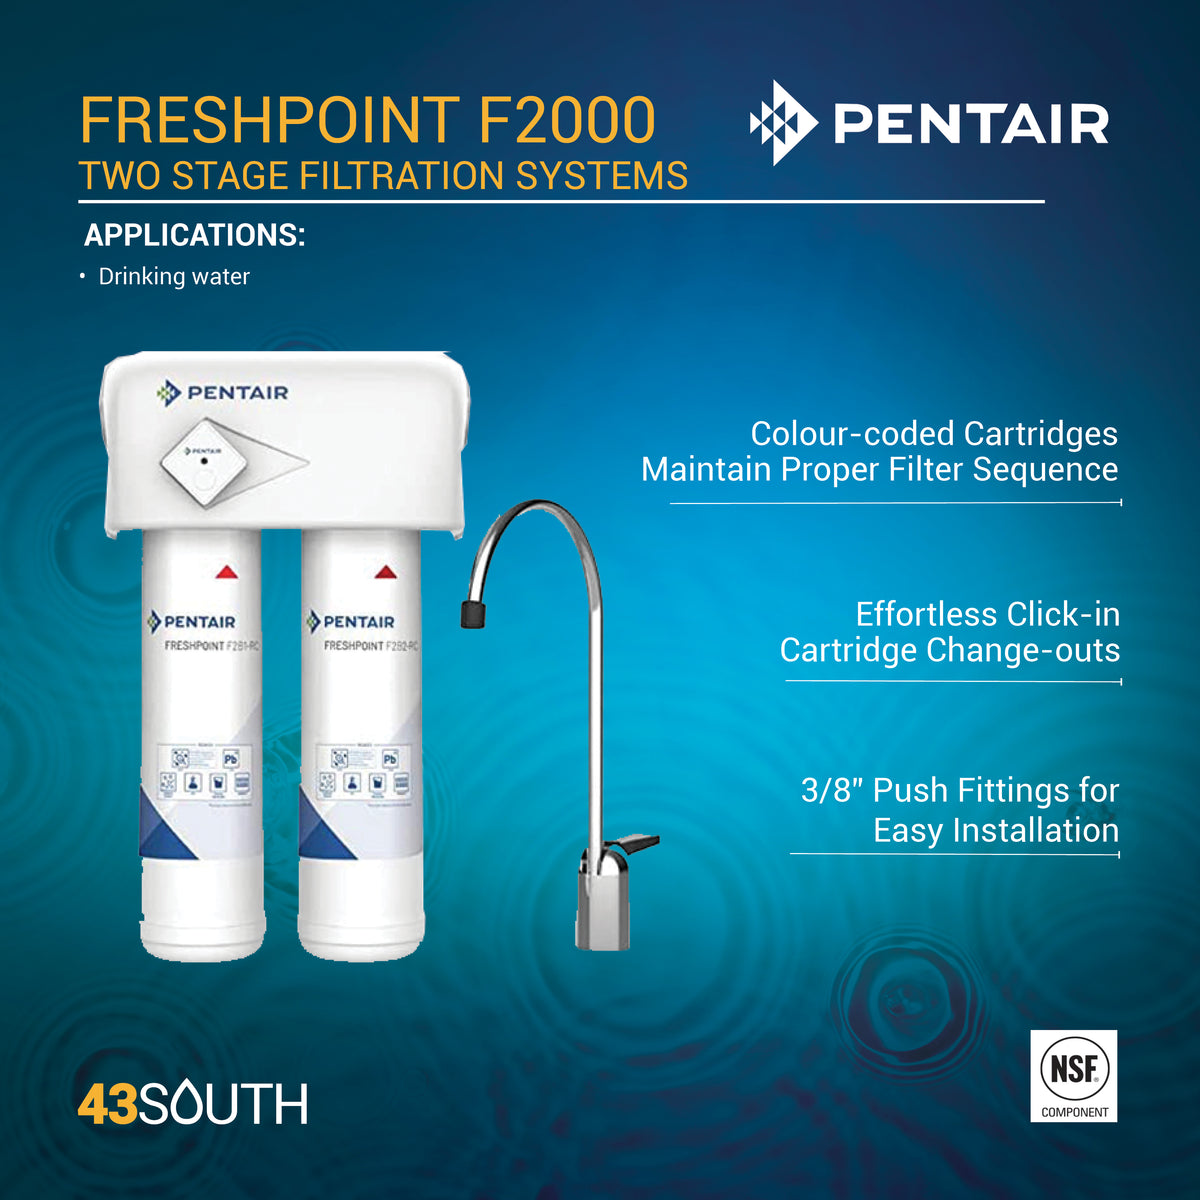 Freshpoint F2000